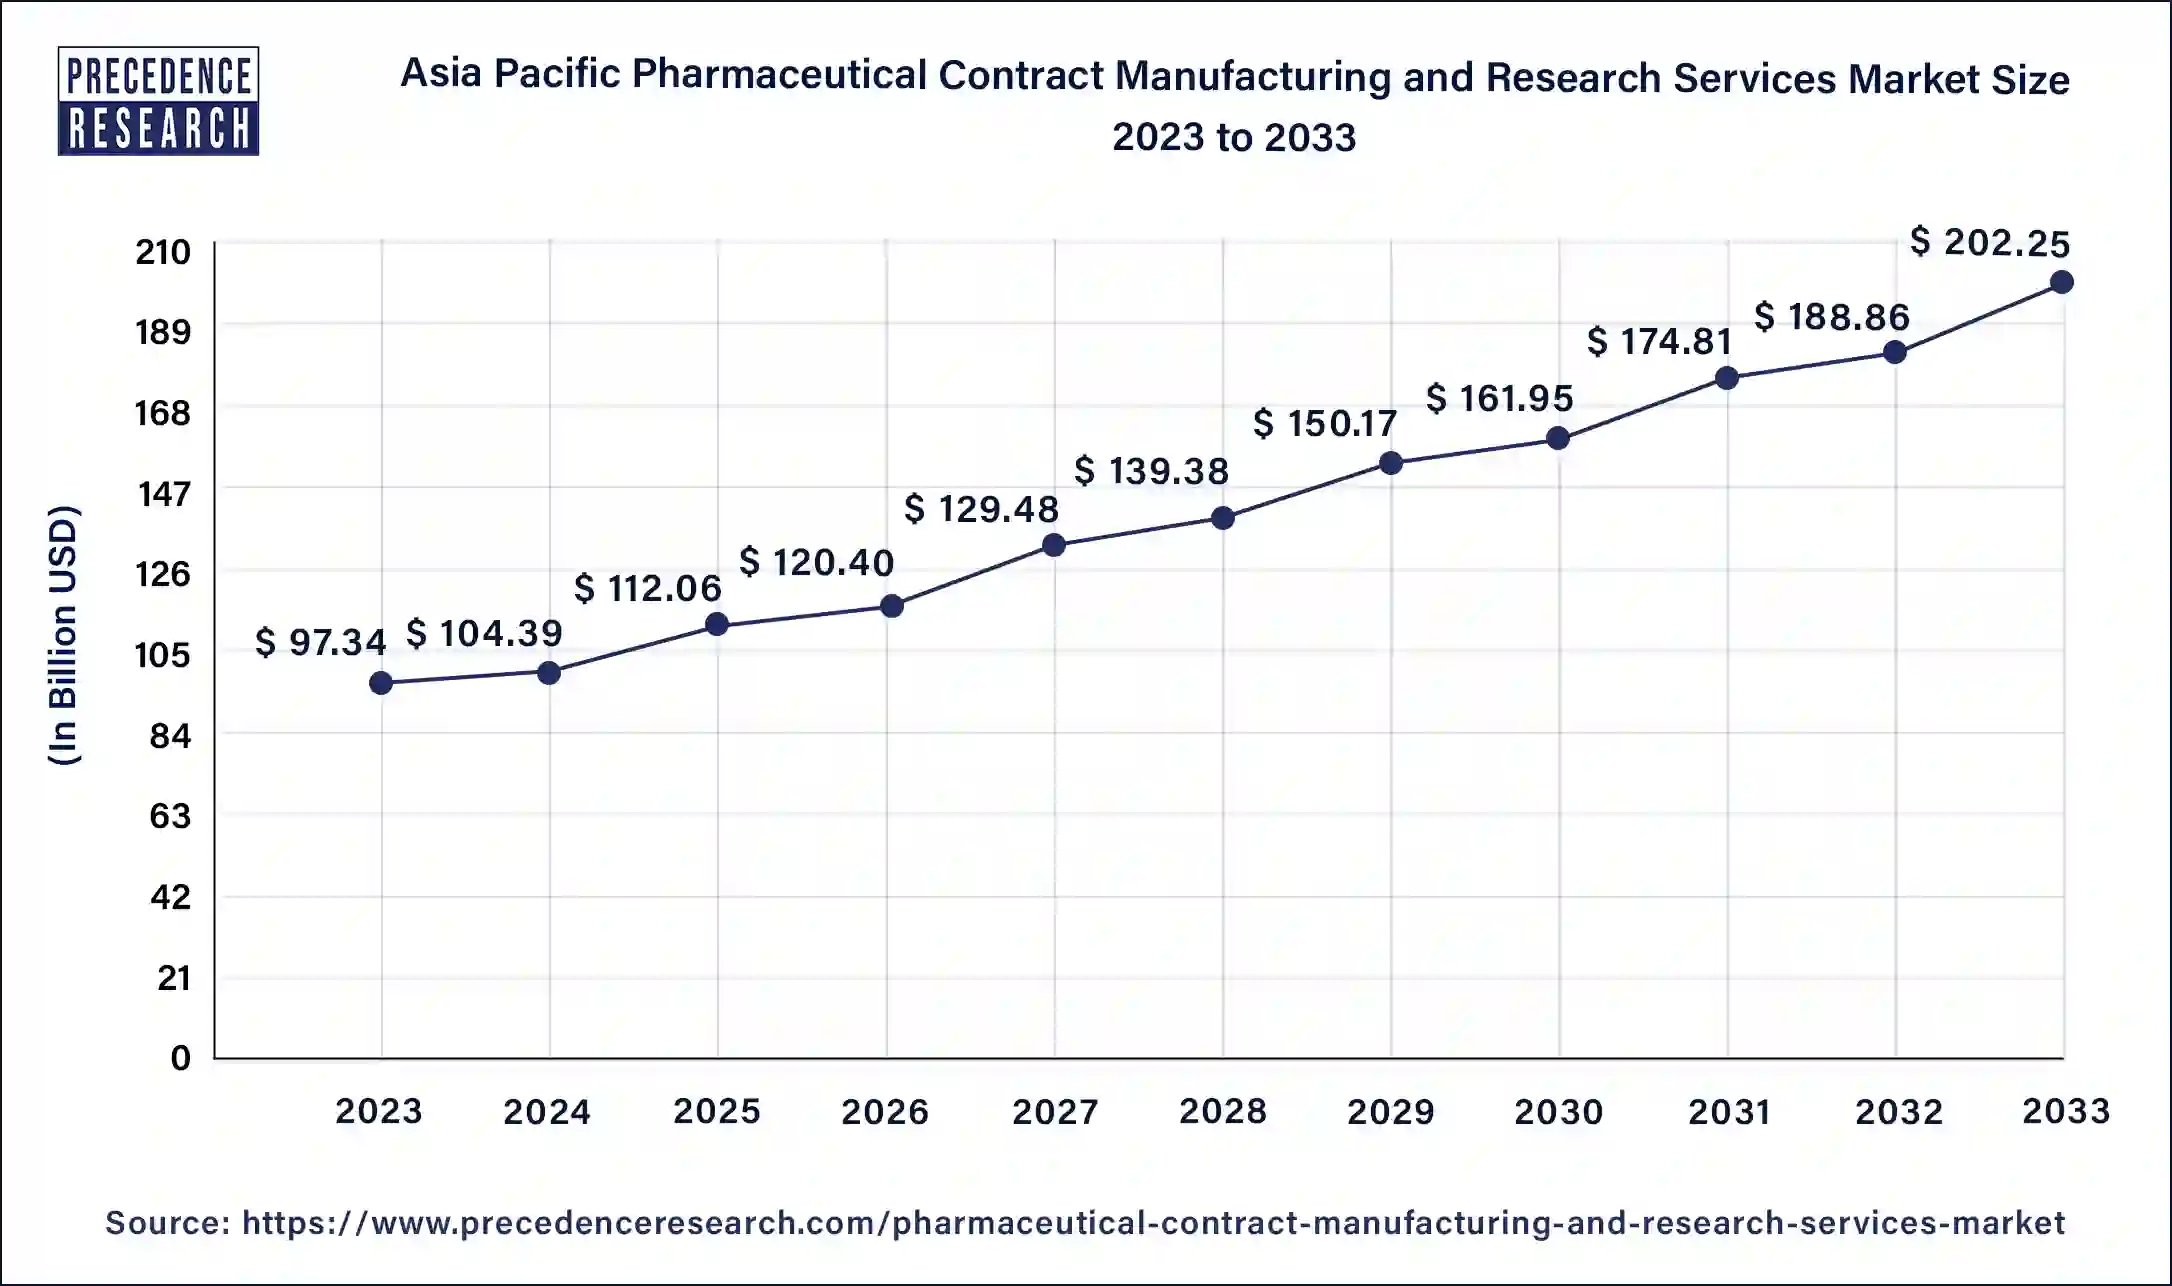 Asia Pacific Pharmaceutical Contract Manufacturing and Research Services Market Size 2024 to 2033